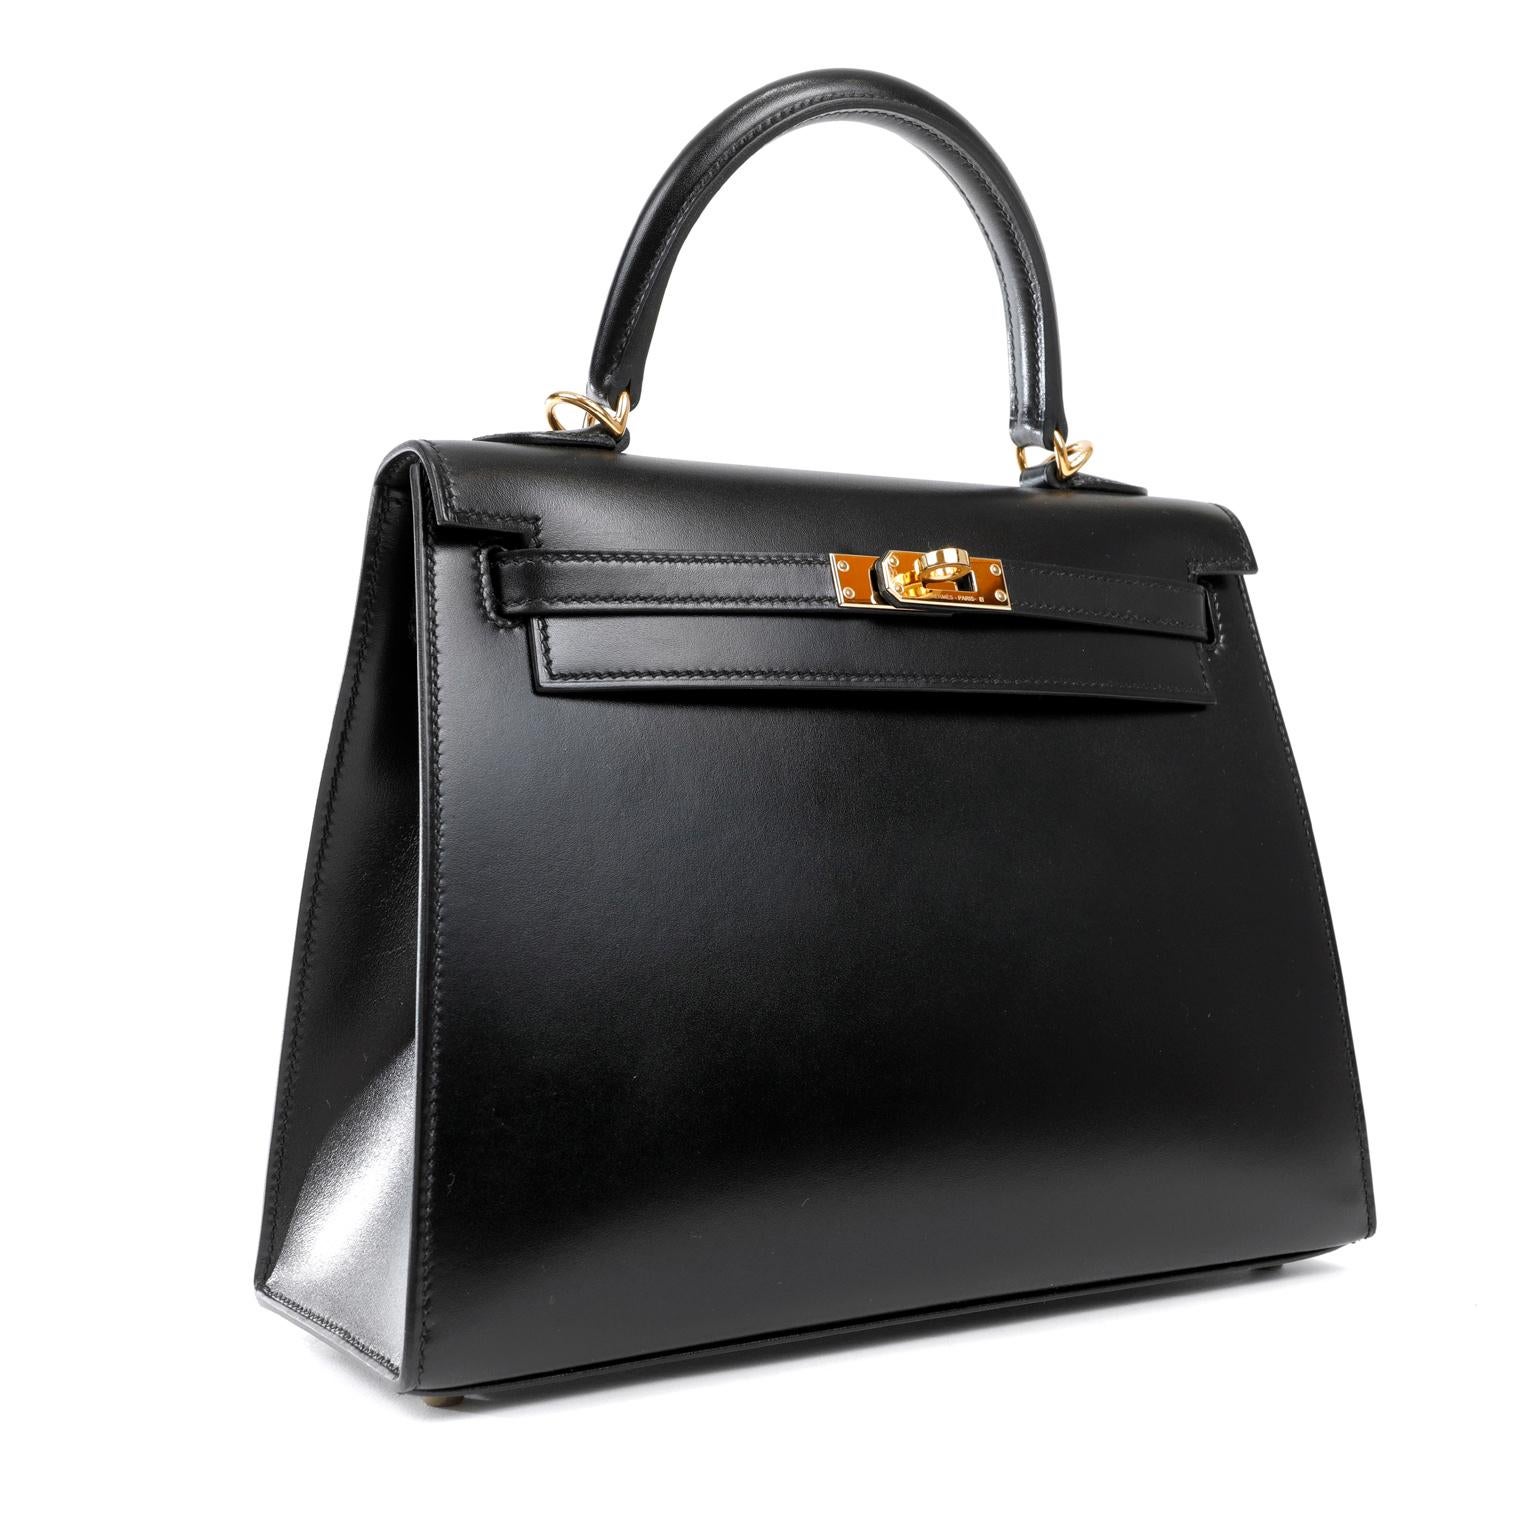 This authentic Hermès Black Box Calf 25 cm Kelly is in totally pristine condition. Hermès bags are considered the ultimate luxury item worldwide. Each piece is handcrafted with waitlists that often exceed a year. The ladylike Kelly is classic and